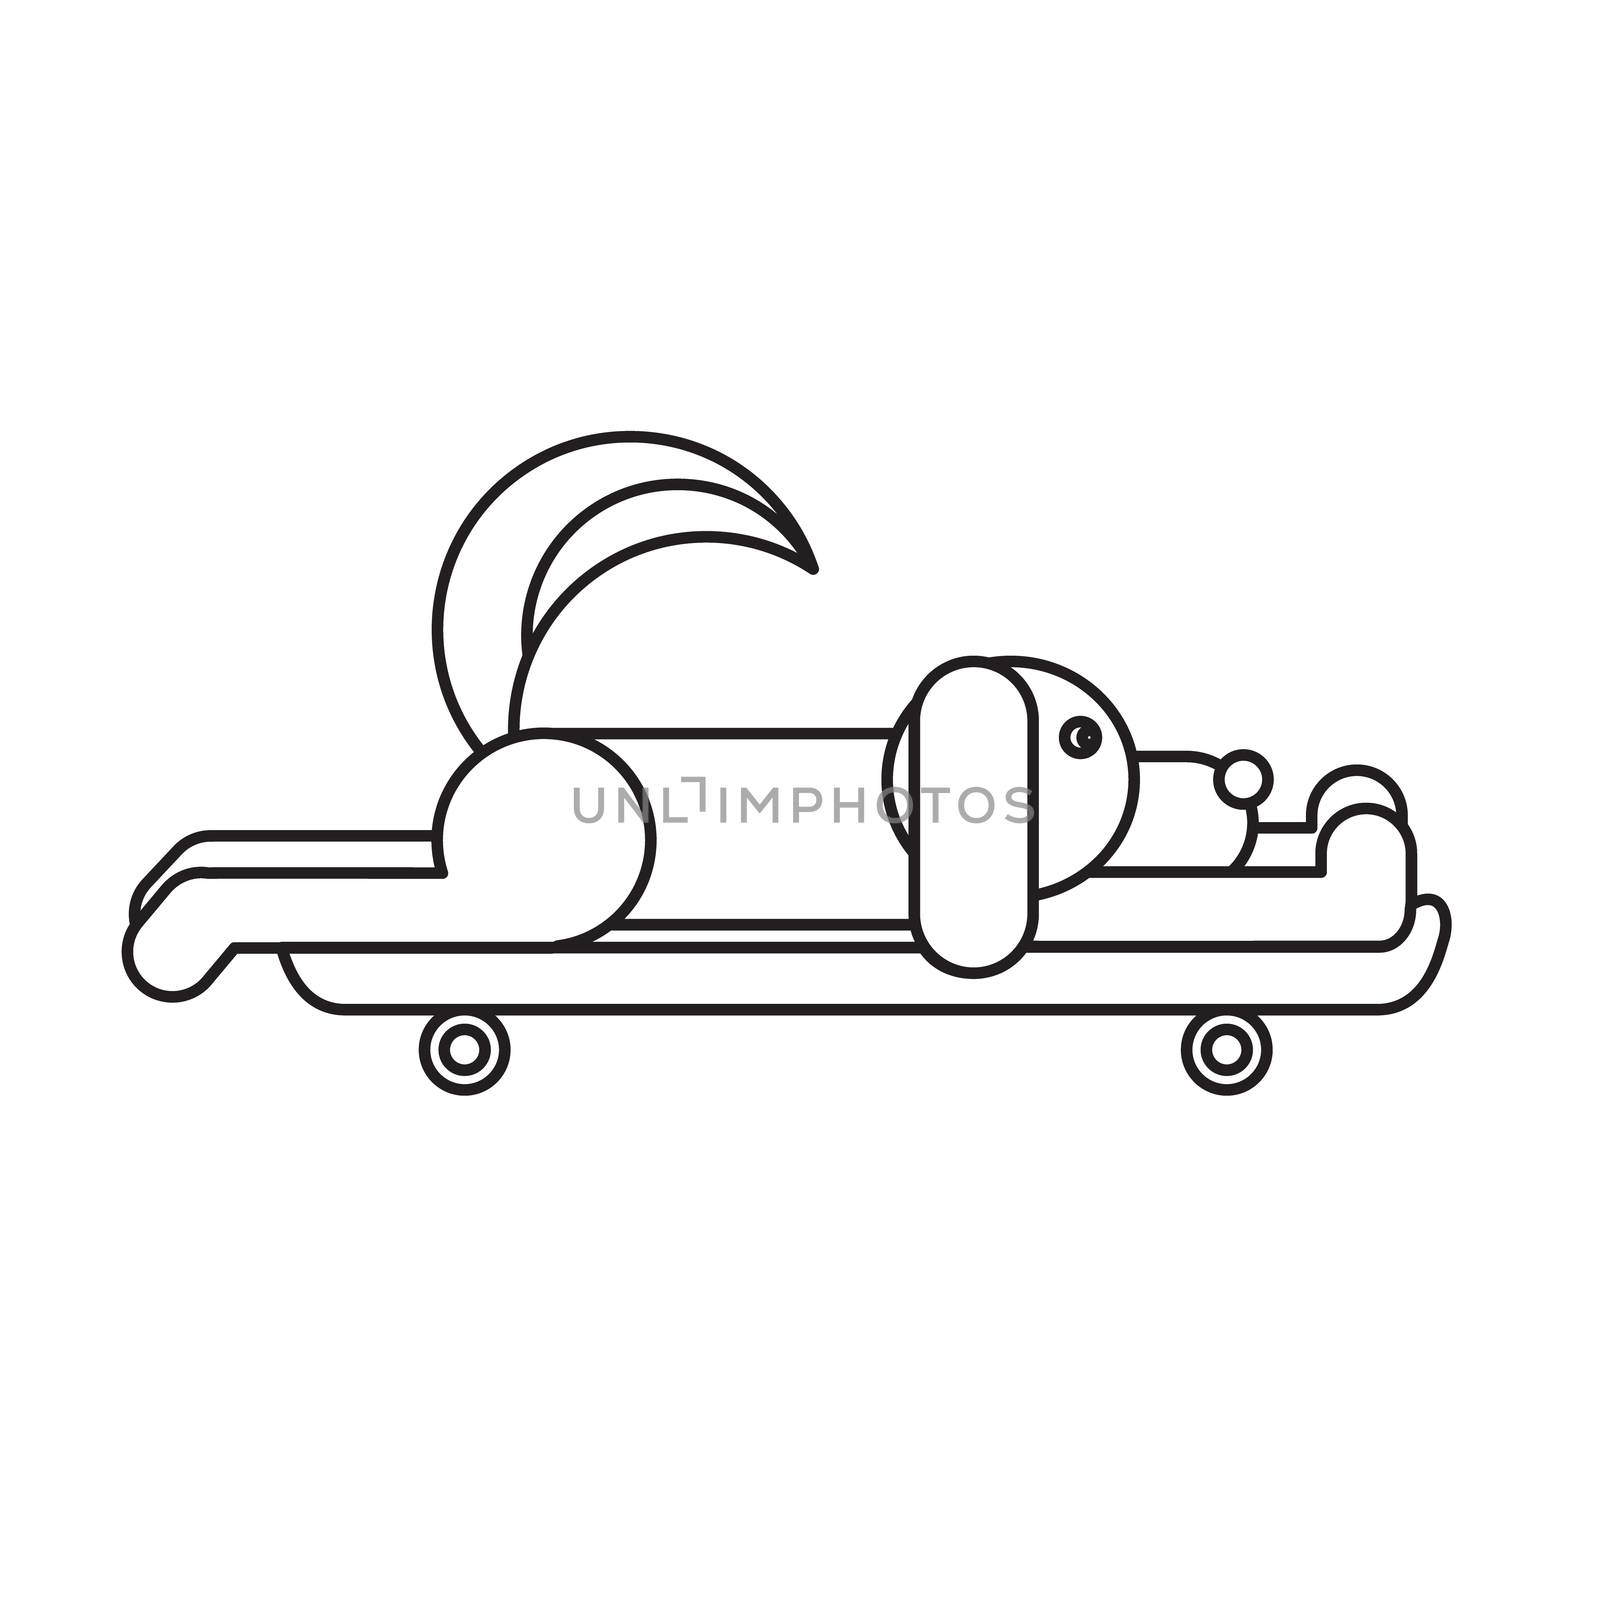 Dog sitting on a skateboard. Vet symbol. Delivery icon. Vector